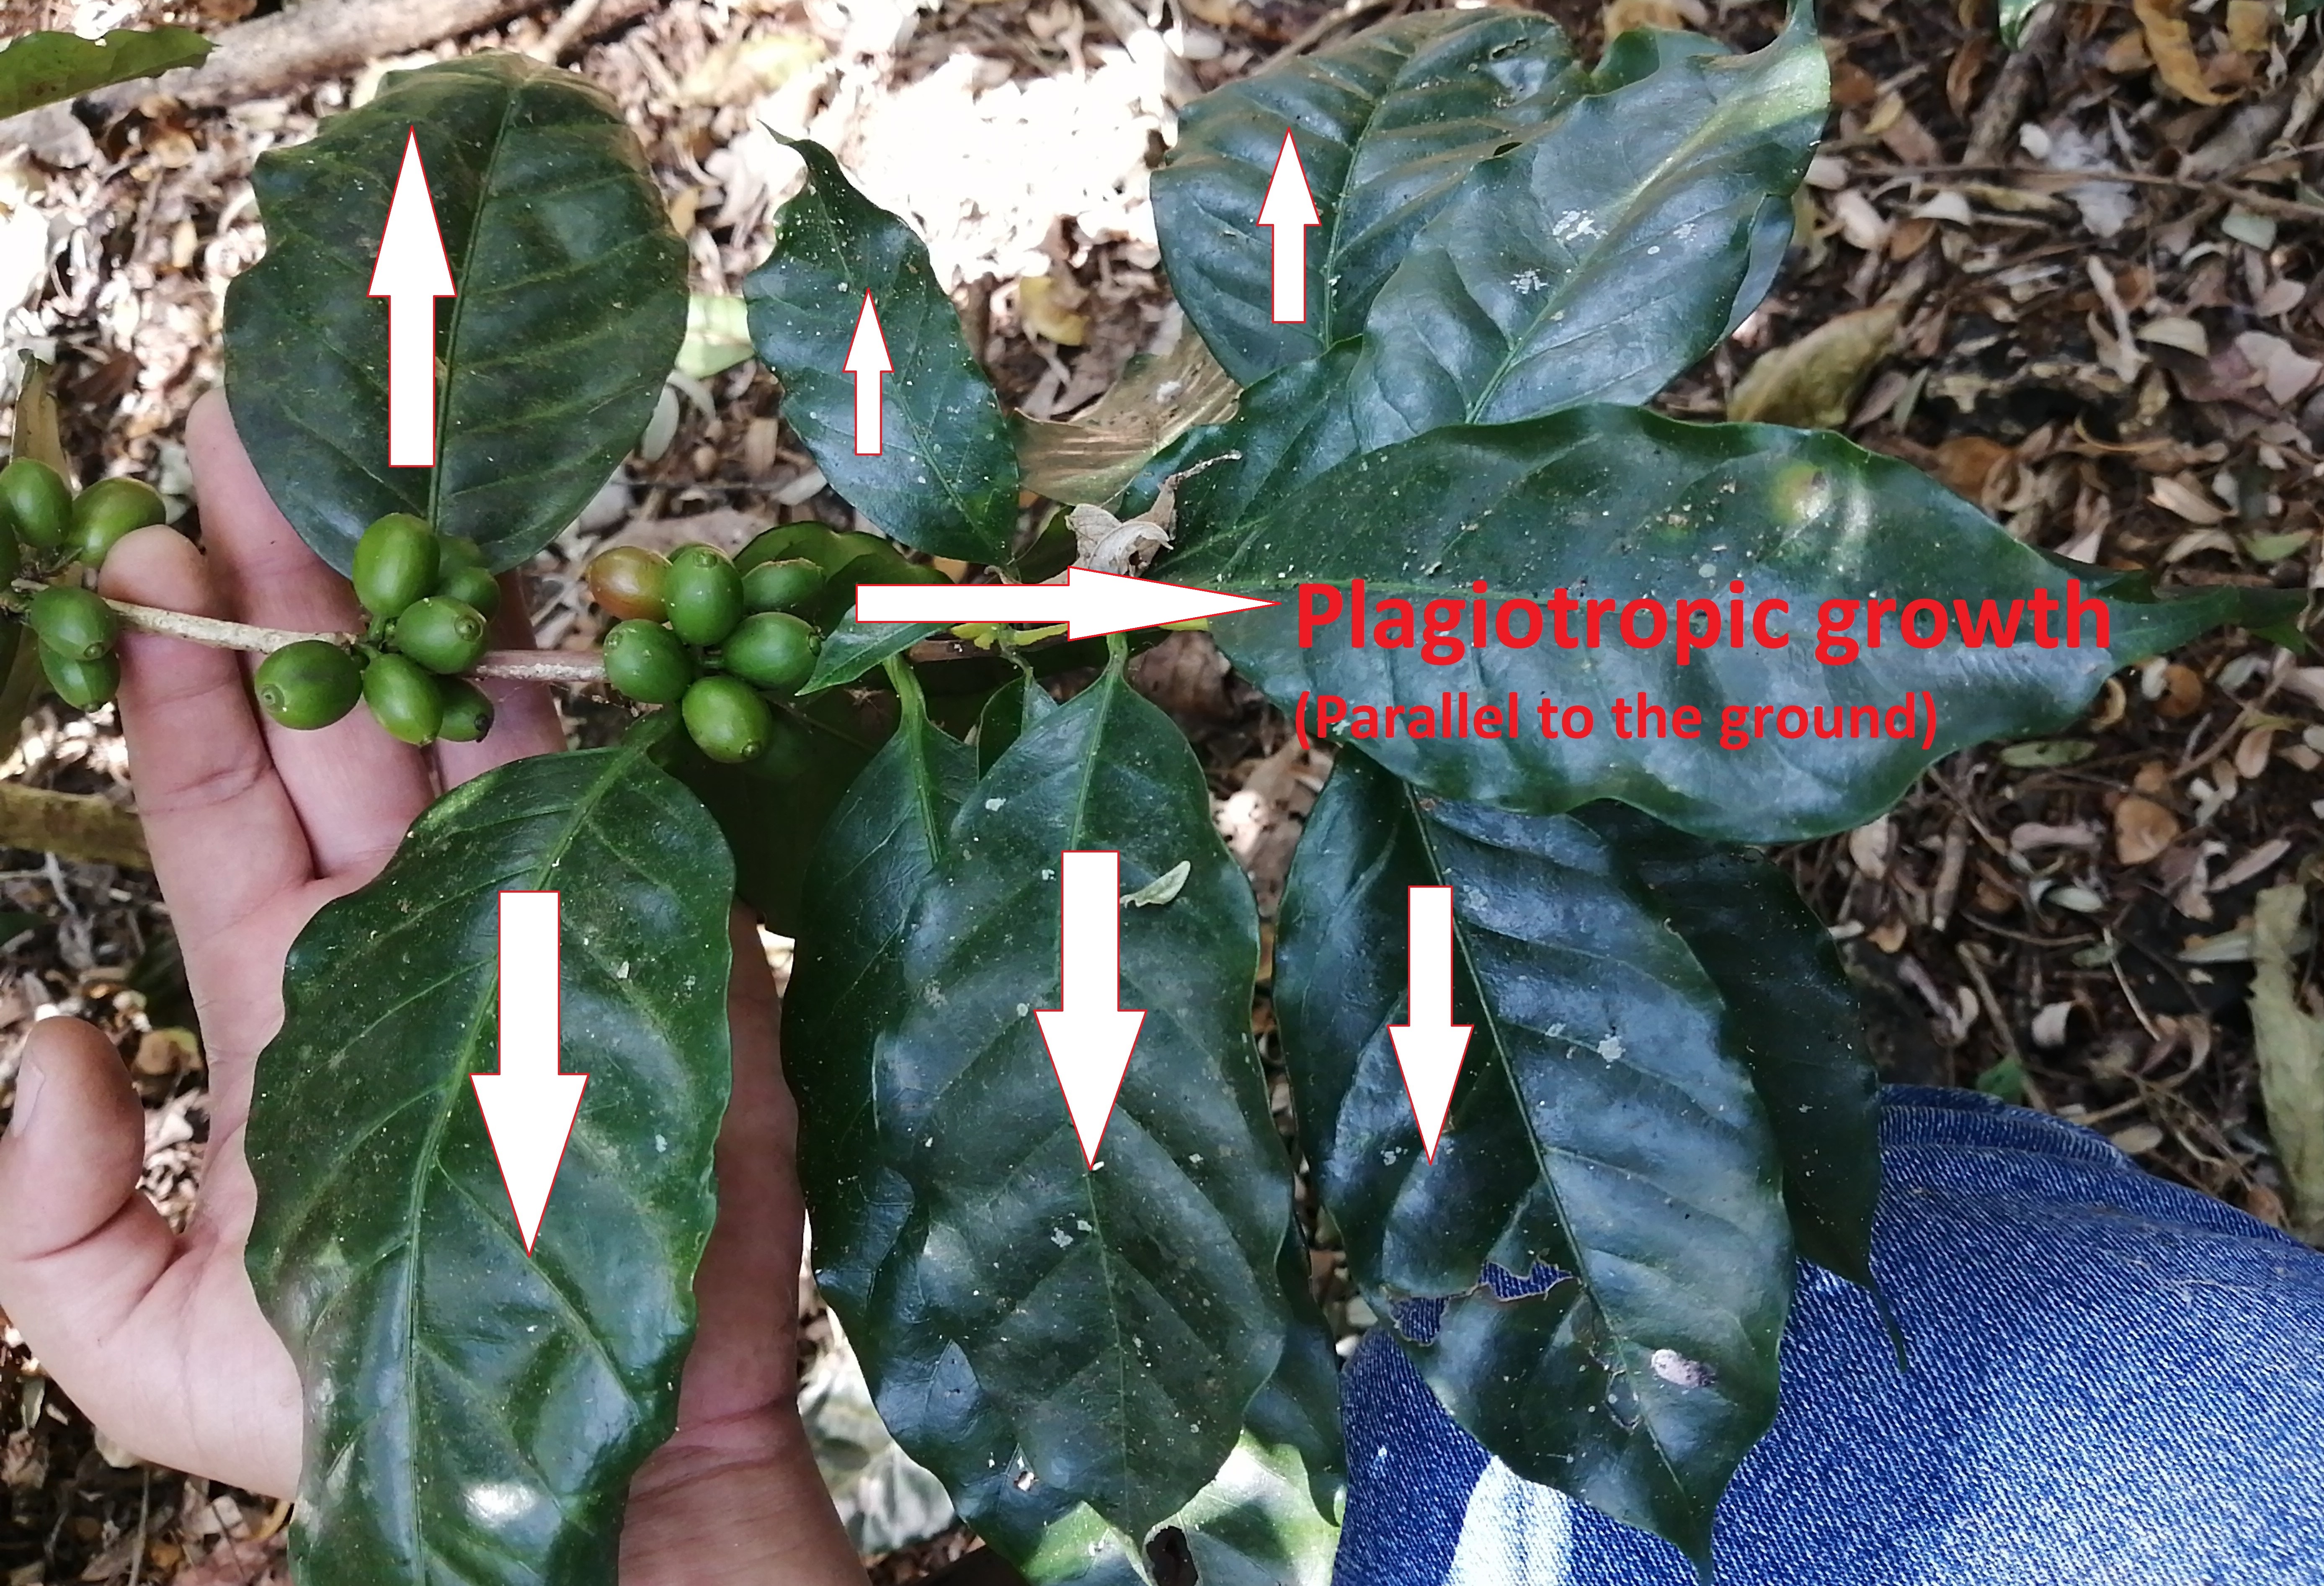 Coffee Plant Information - What is the leaf morphology of Coffea arabica?